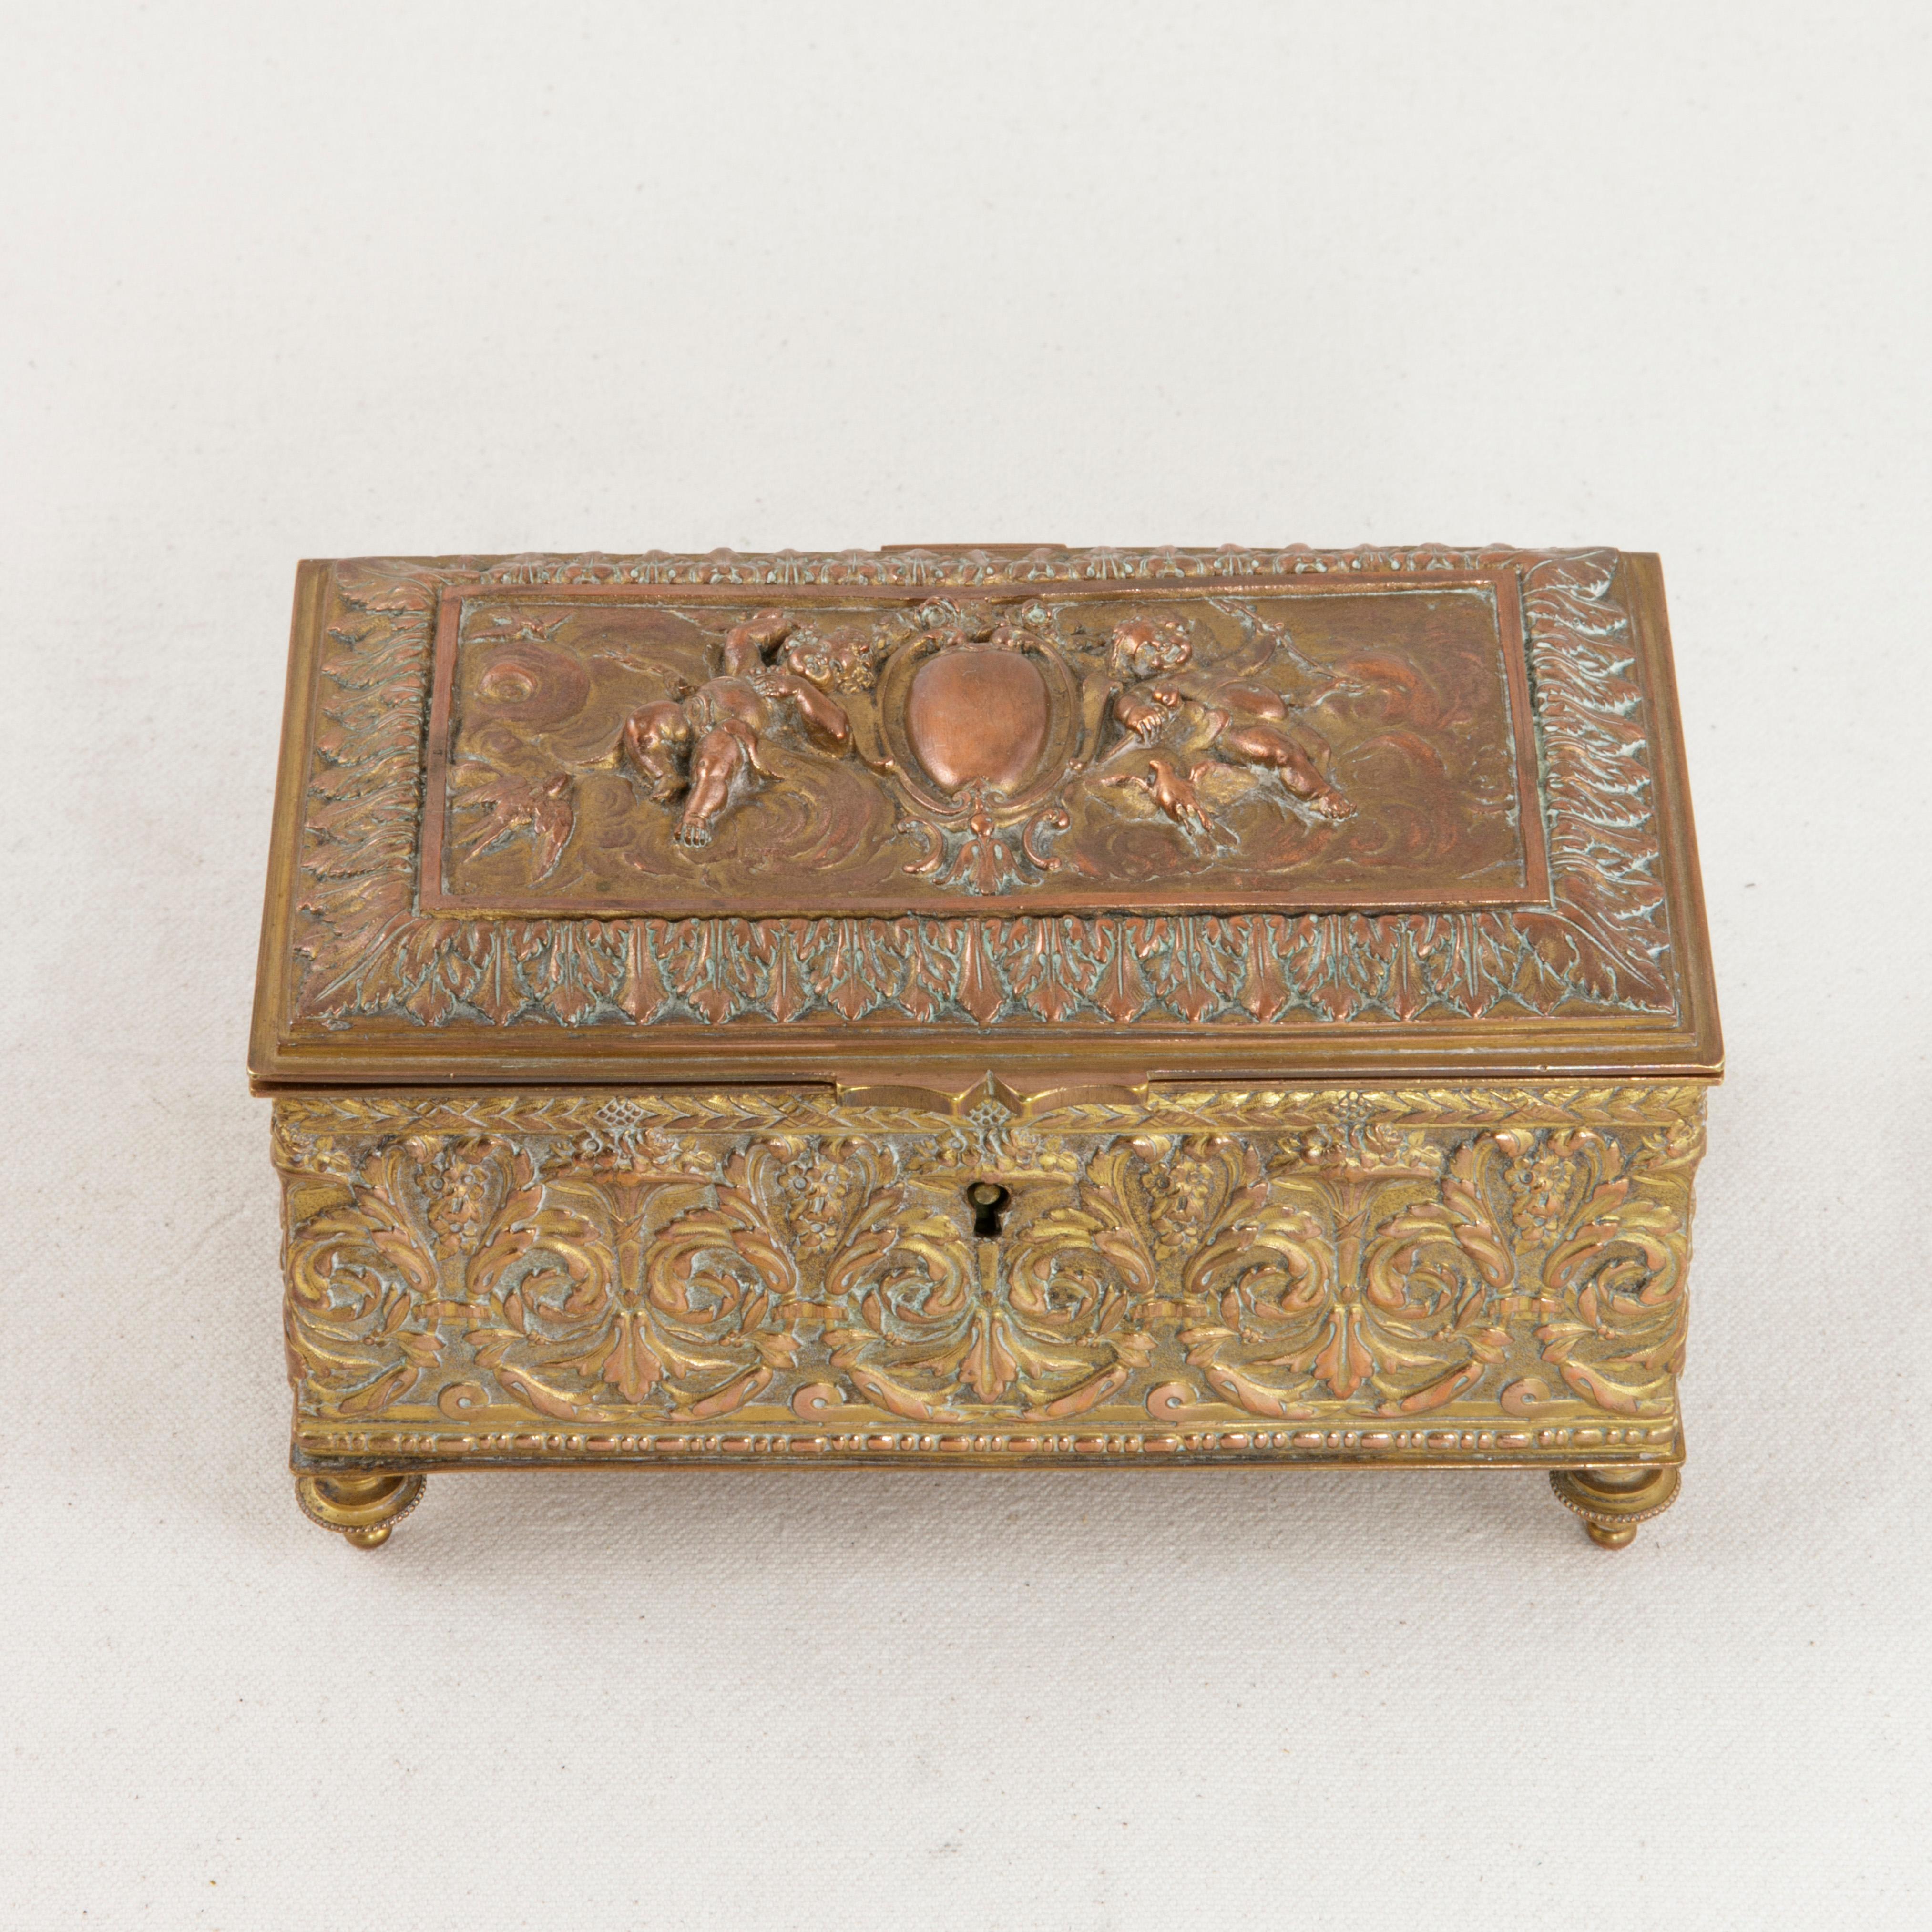 This French copper box with lid from the turn of the 20th century features a repousse facade detailed with an intricately scrolled acanthus leaf pattern. The lid is decorated with a central cartouche flanked by cherubs and birds. The box rests on